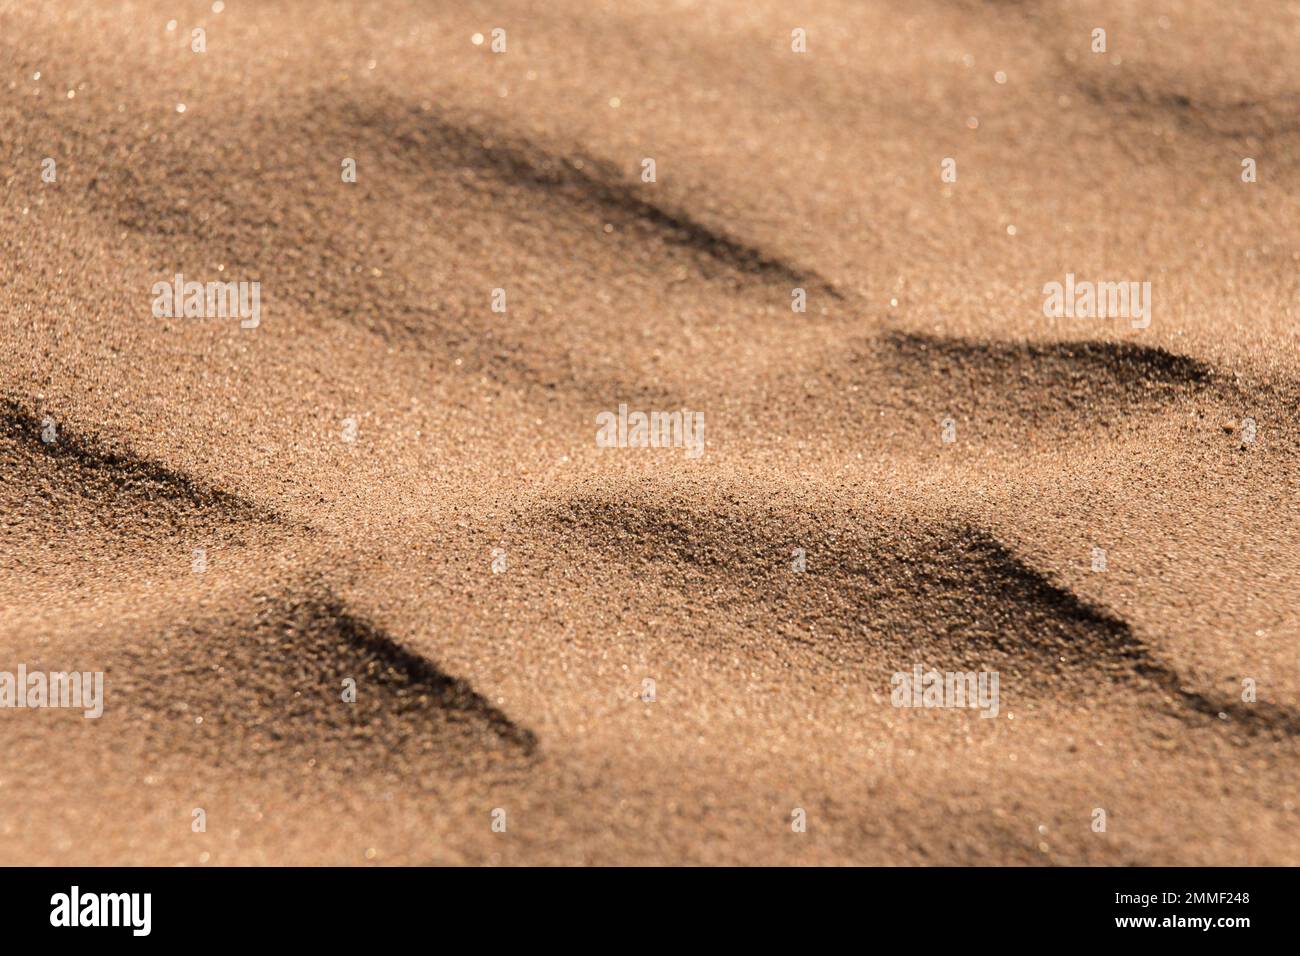 Textures and patterns in a sand dune Stock Photo